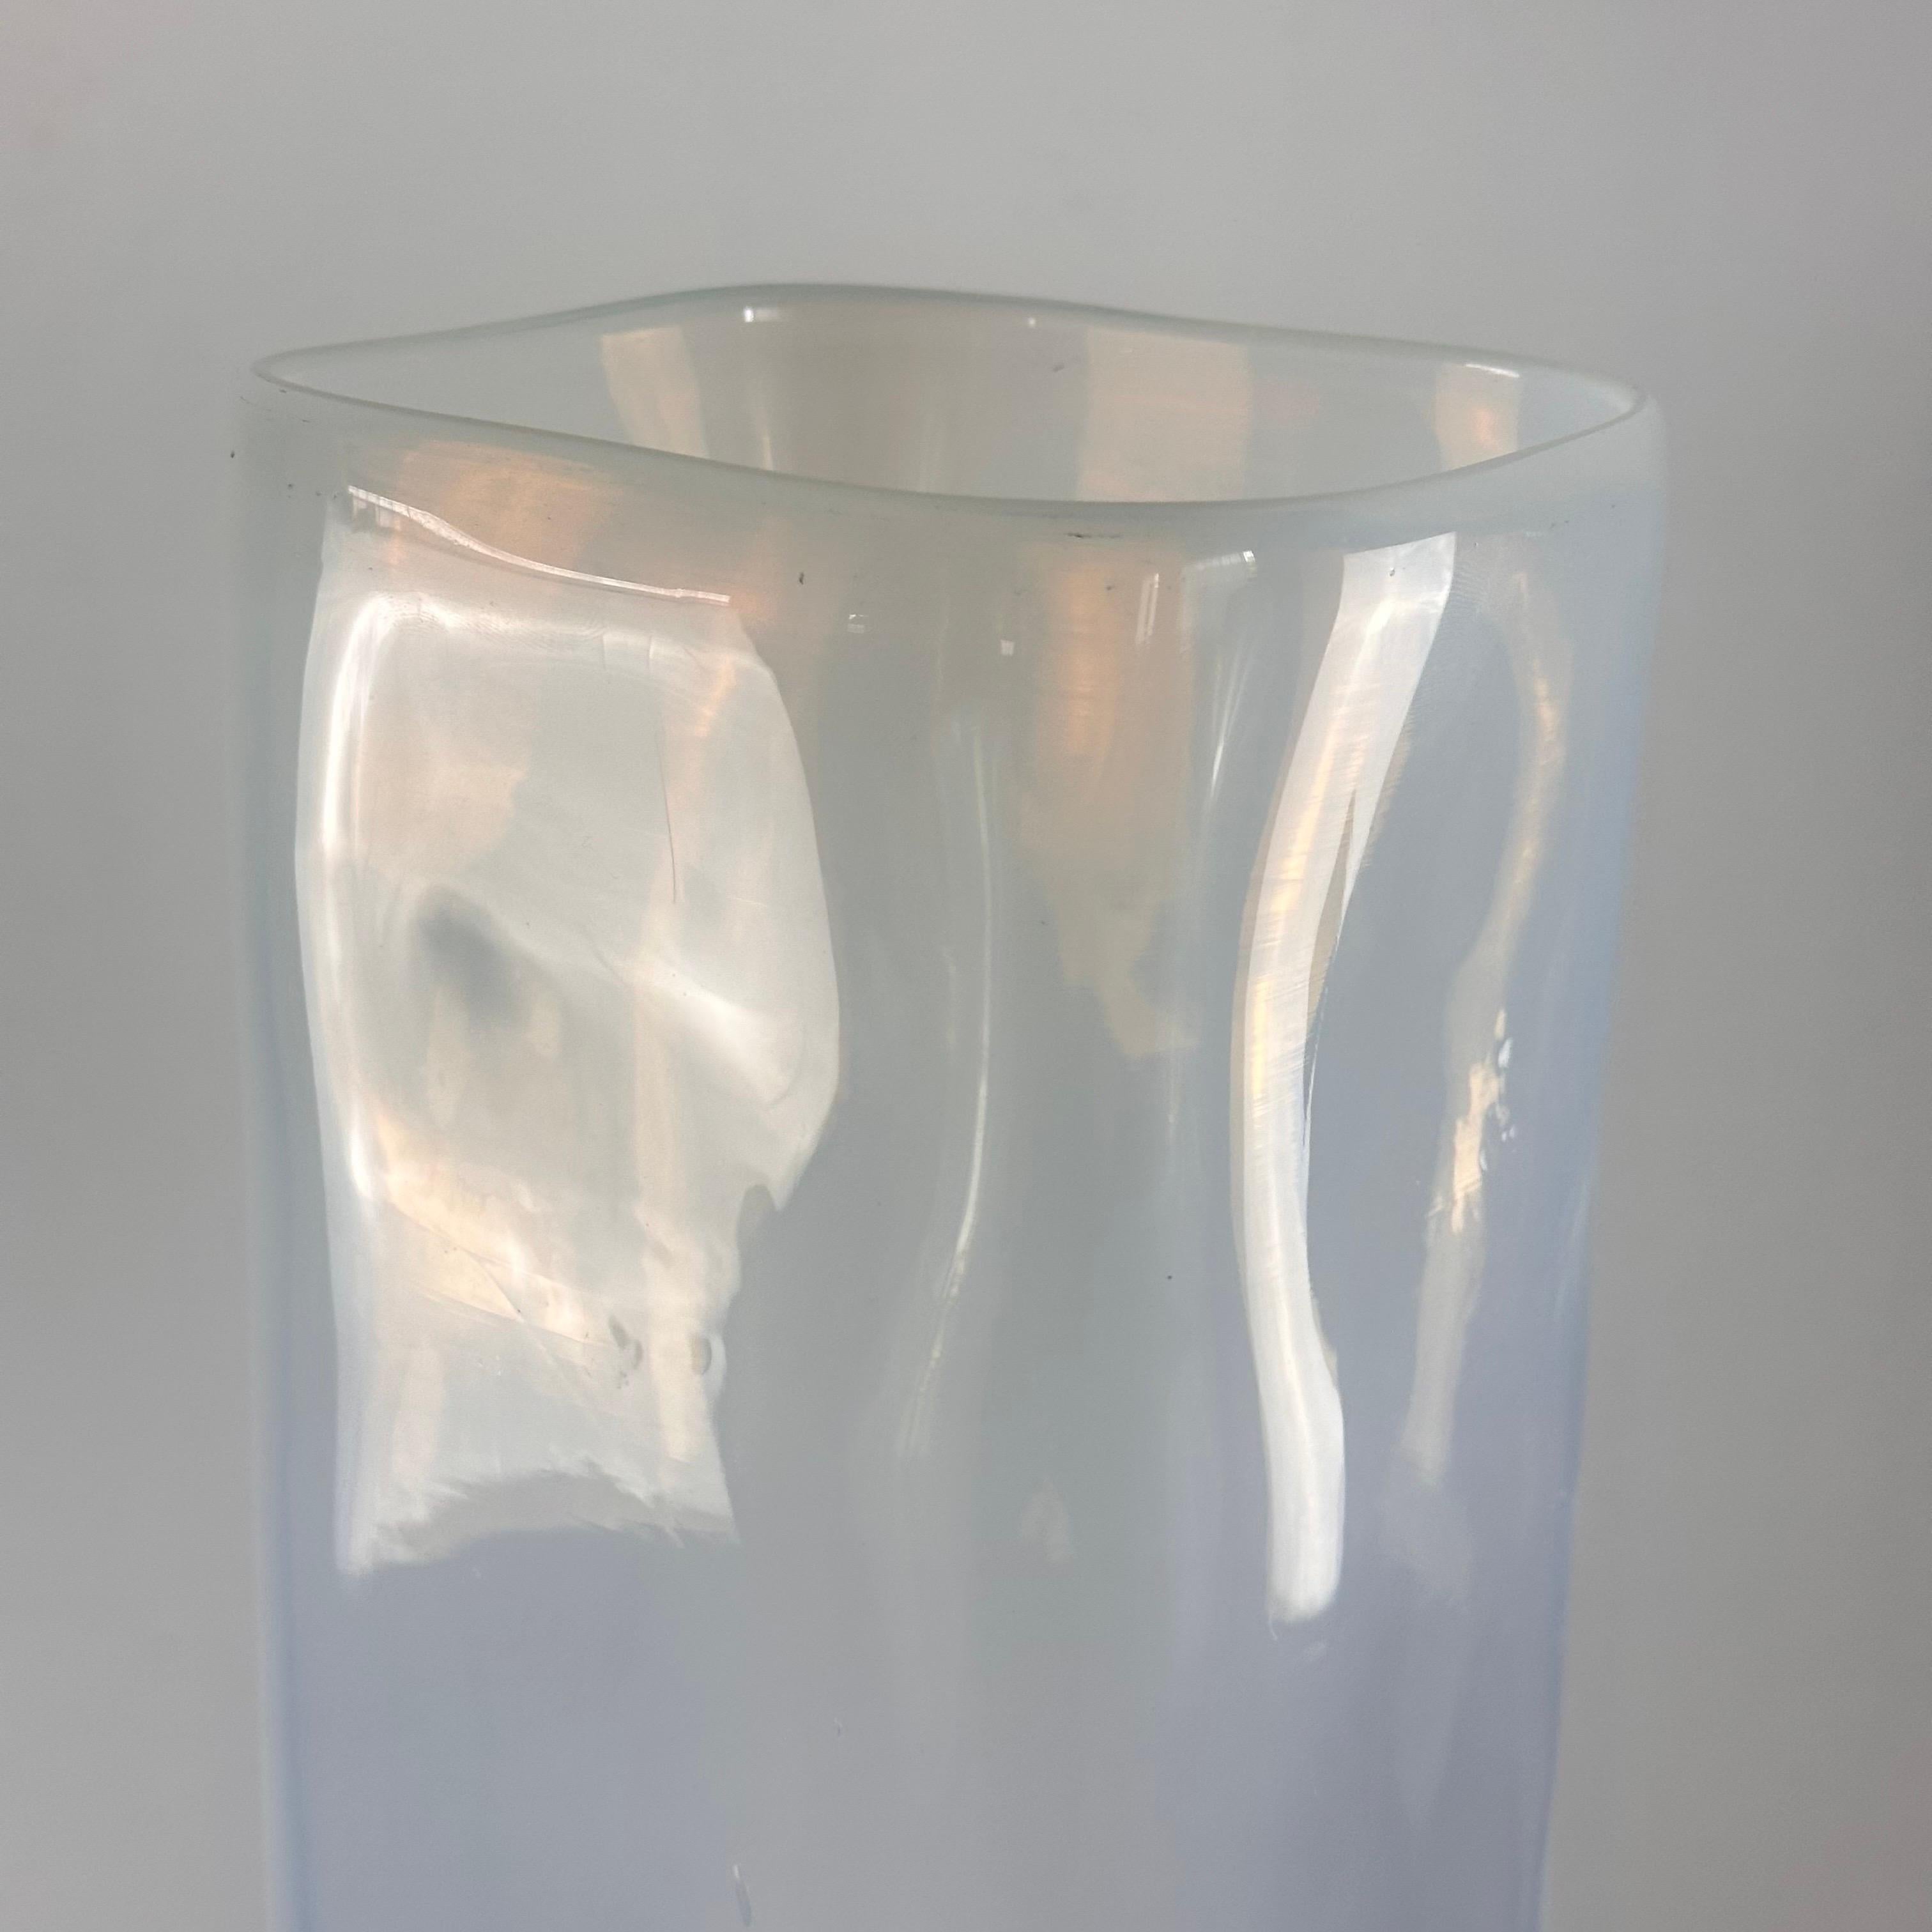 Large Vintage Murano Glass Vase by Carlo Nason for Mazzega, 1970s For Sale 5